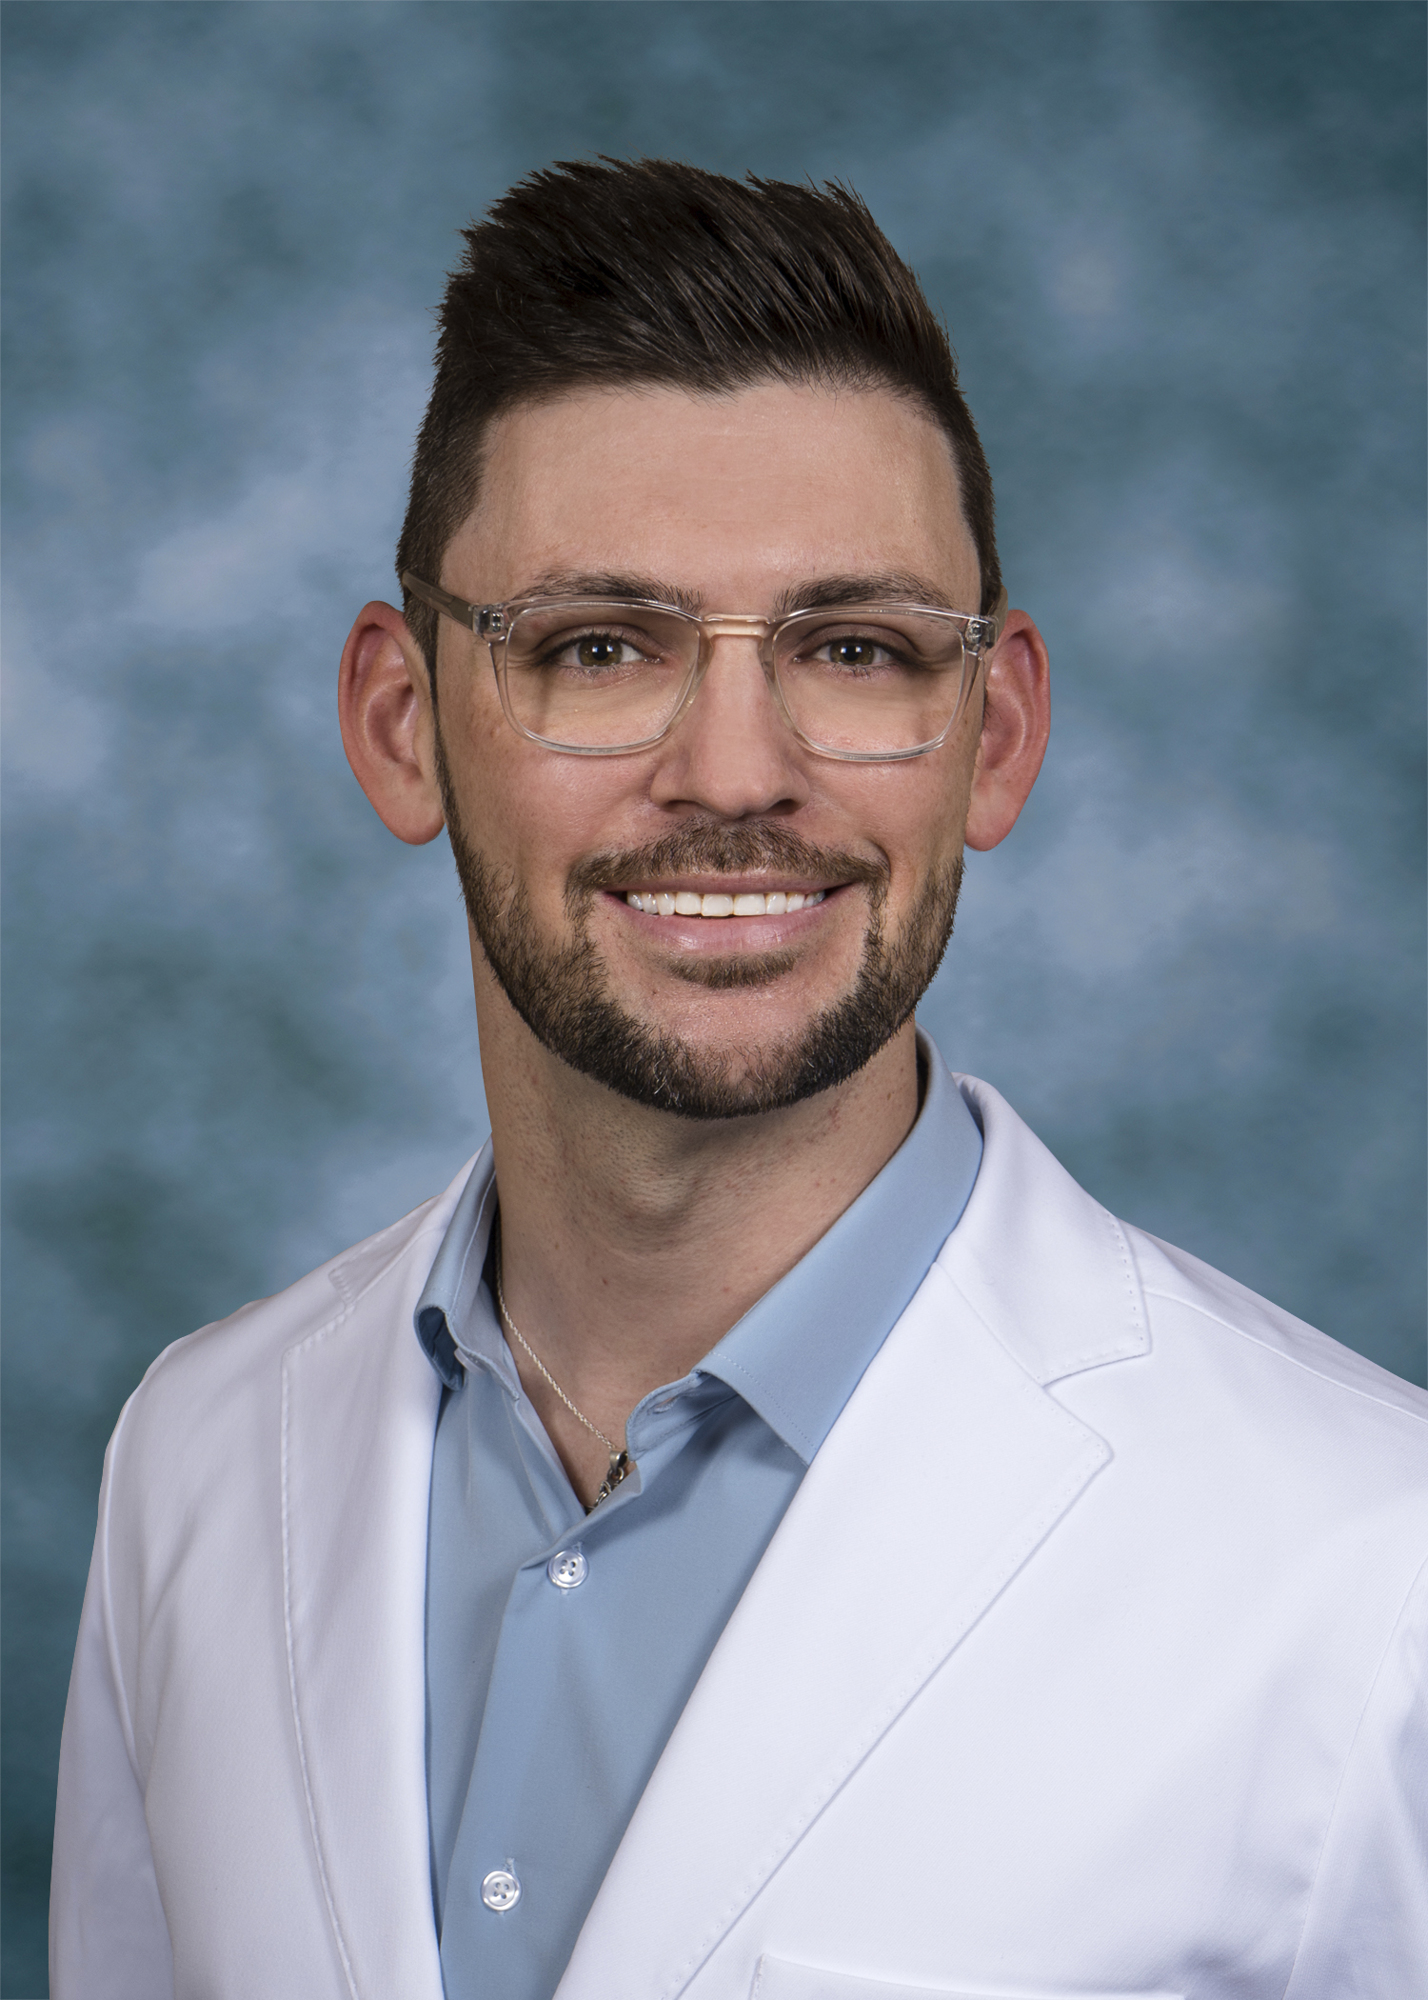 Dr. Steven Papuchis is a specialist in physical medicine and rehabilitation. Photo courtesy of Sarasota Memorial Hospital.